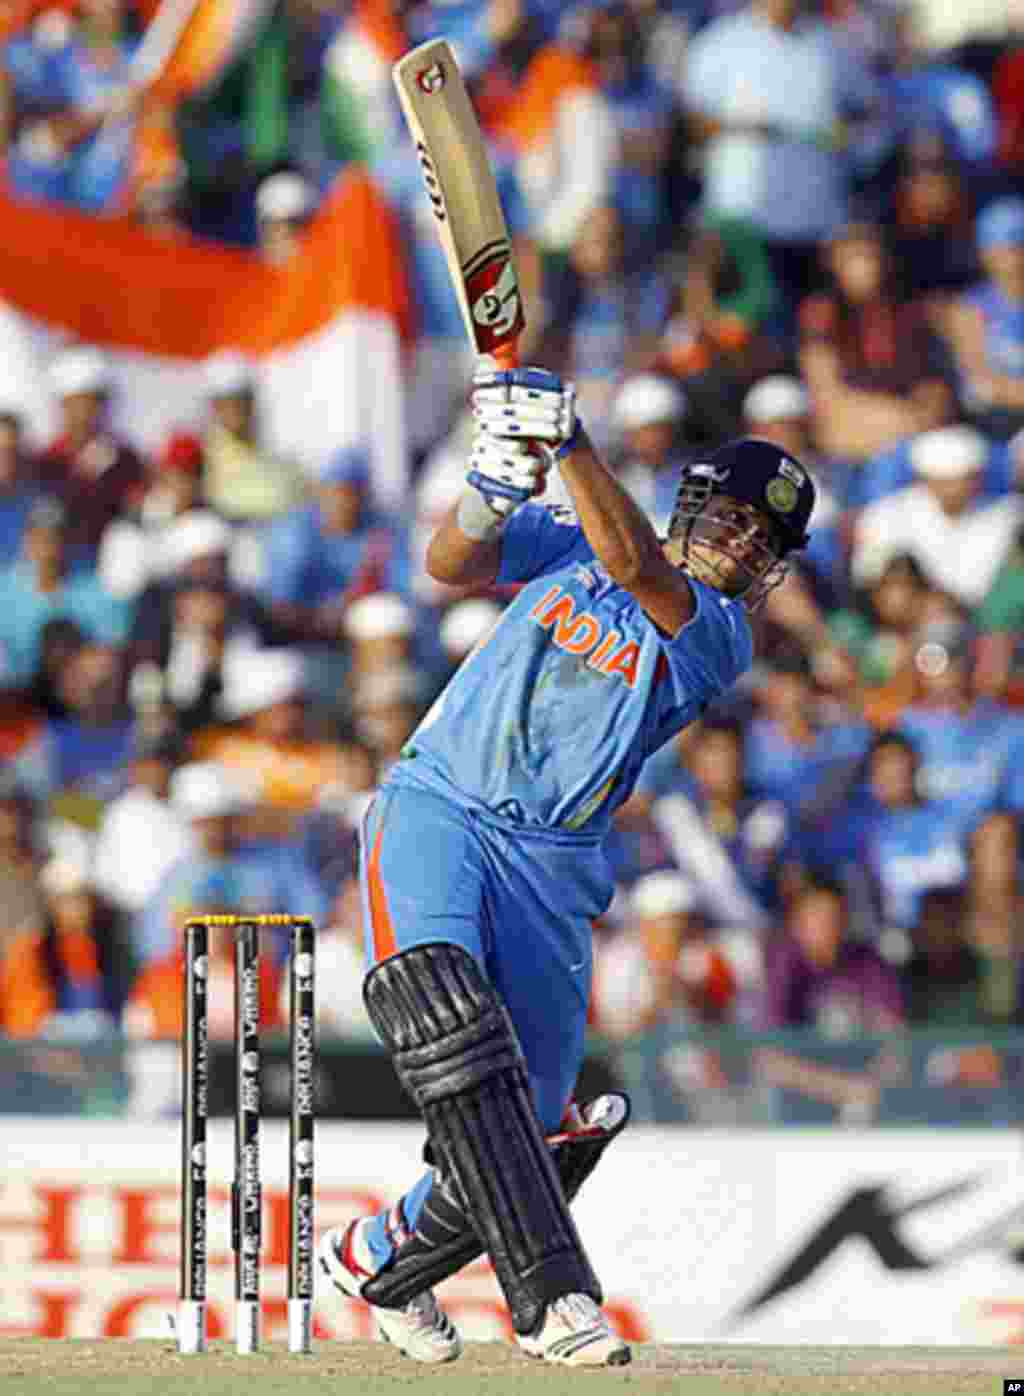 India's Suresh Raina plays a shot during their ICC Cricket World Cup 2011 semi-final match against Pakistan in Mohali, March 30, 2011.